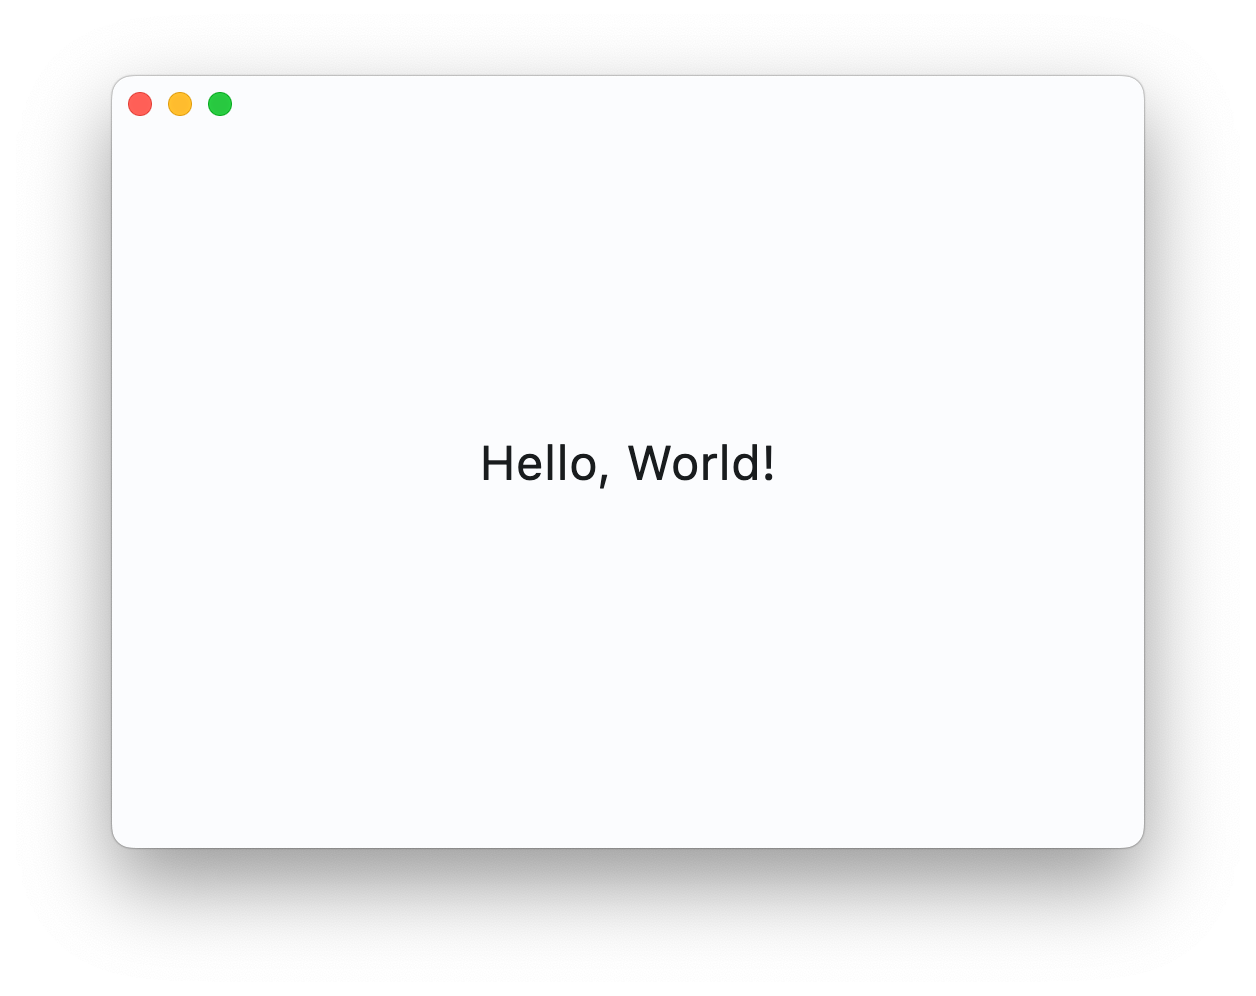 An app window with the words 'Hello, World!' in the center